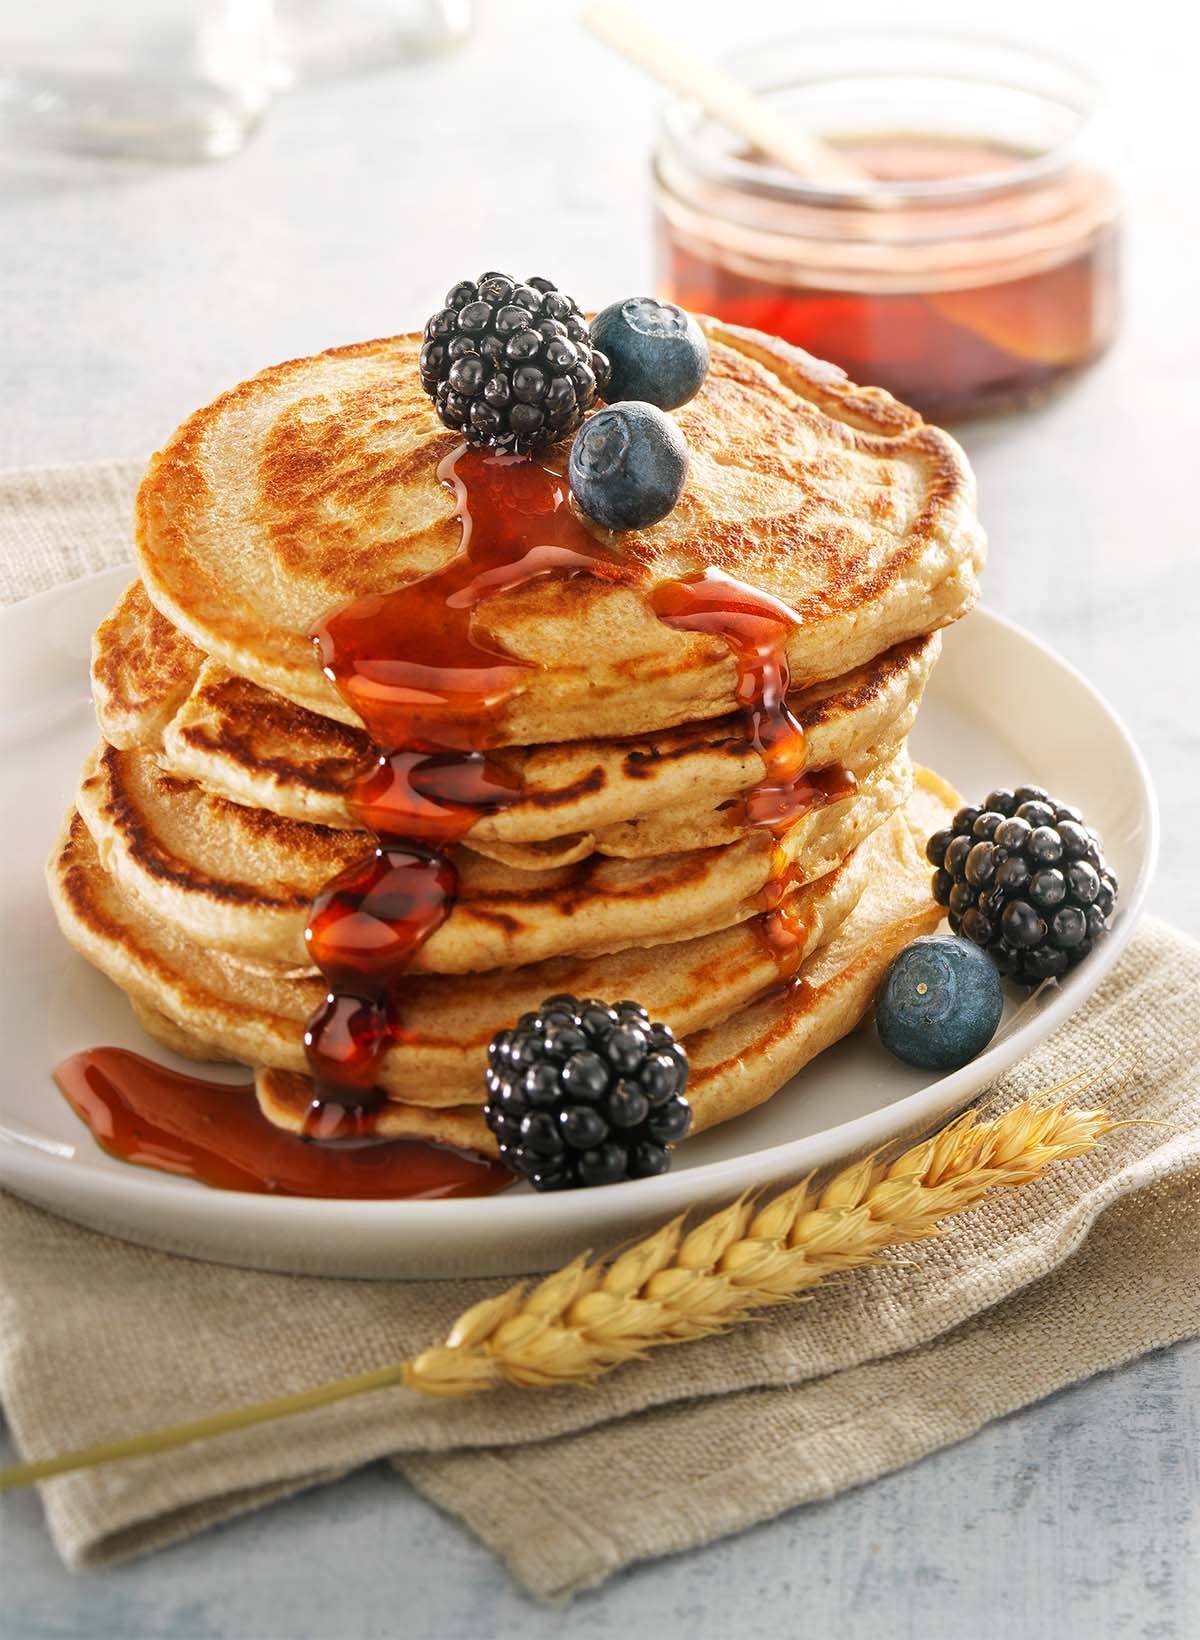 Food styling photography of pancakes with blueberries made by Studio_m Photography Amsterdam